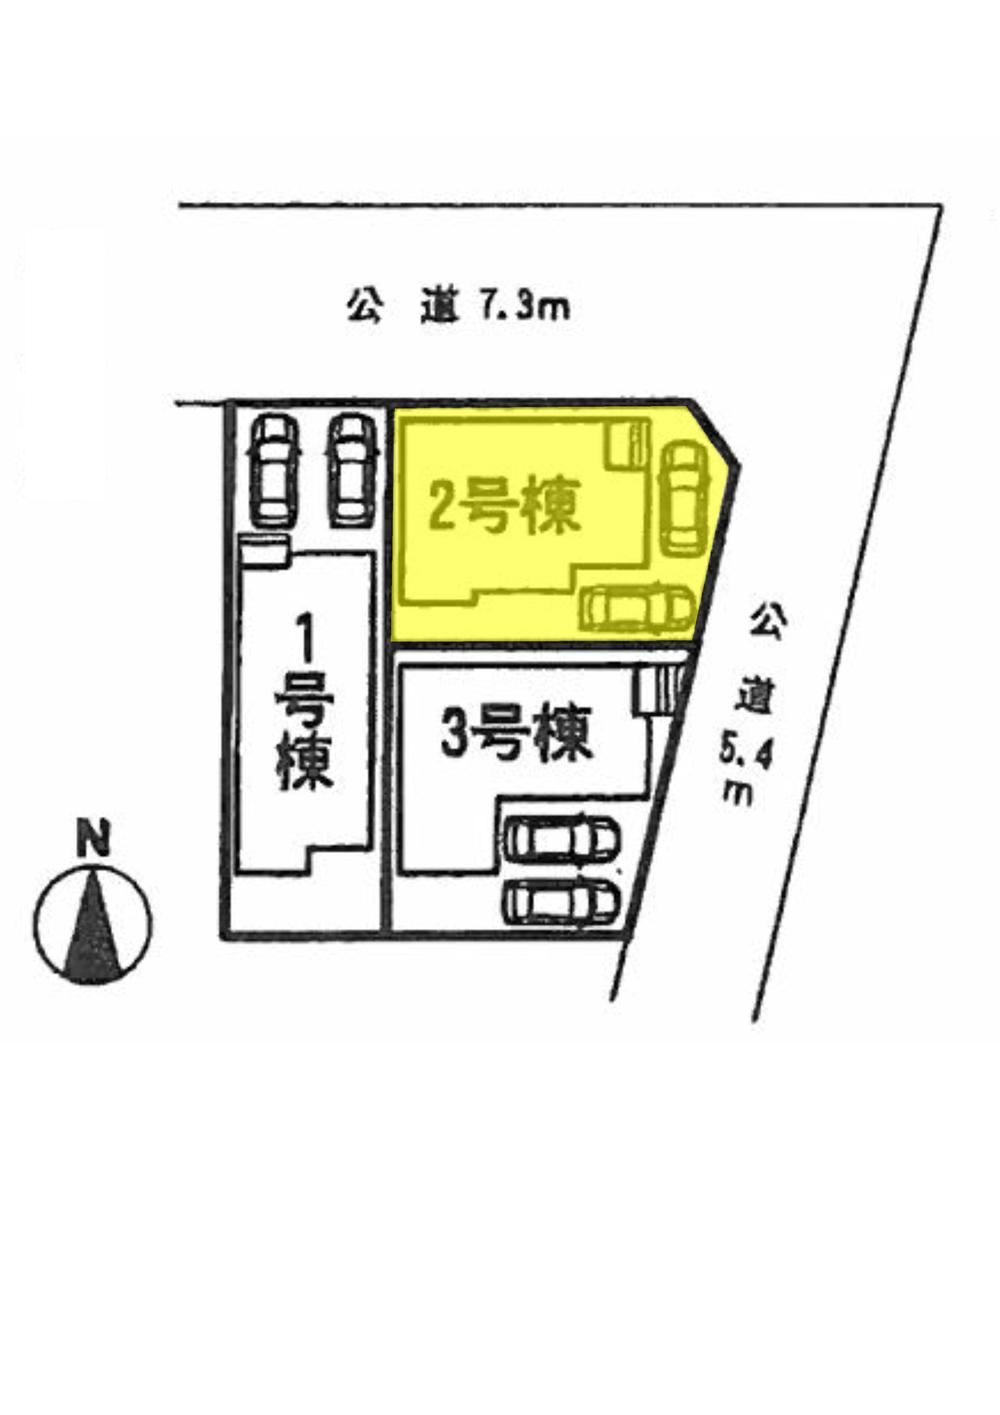 The entire compartment Figure. It will be part of the yellow Building 2. 